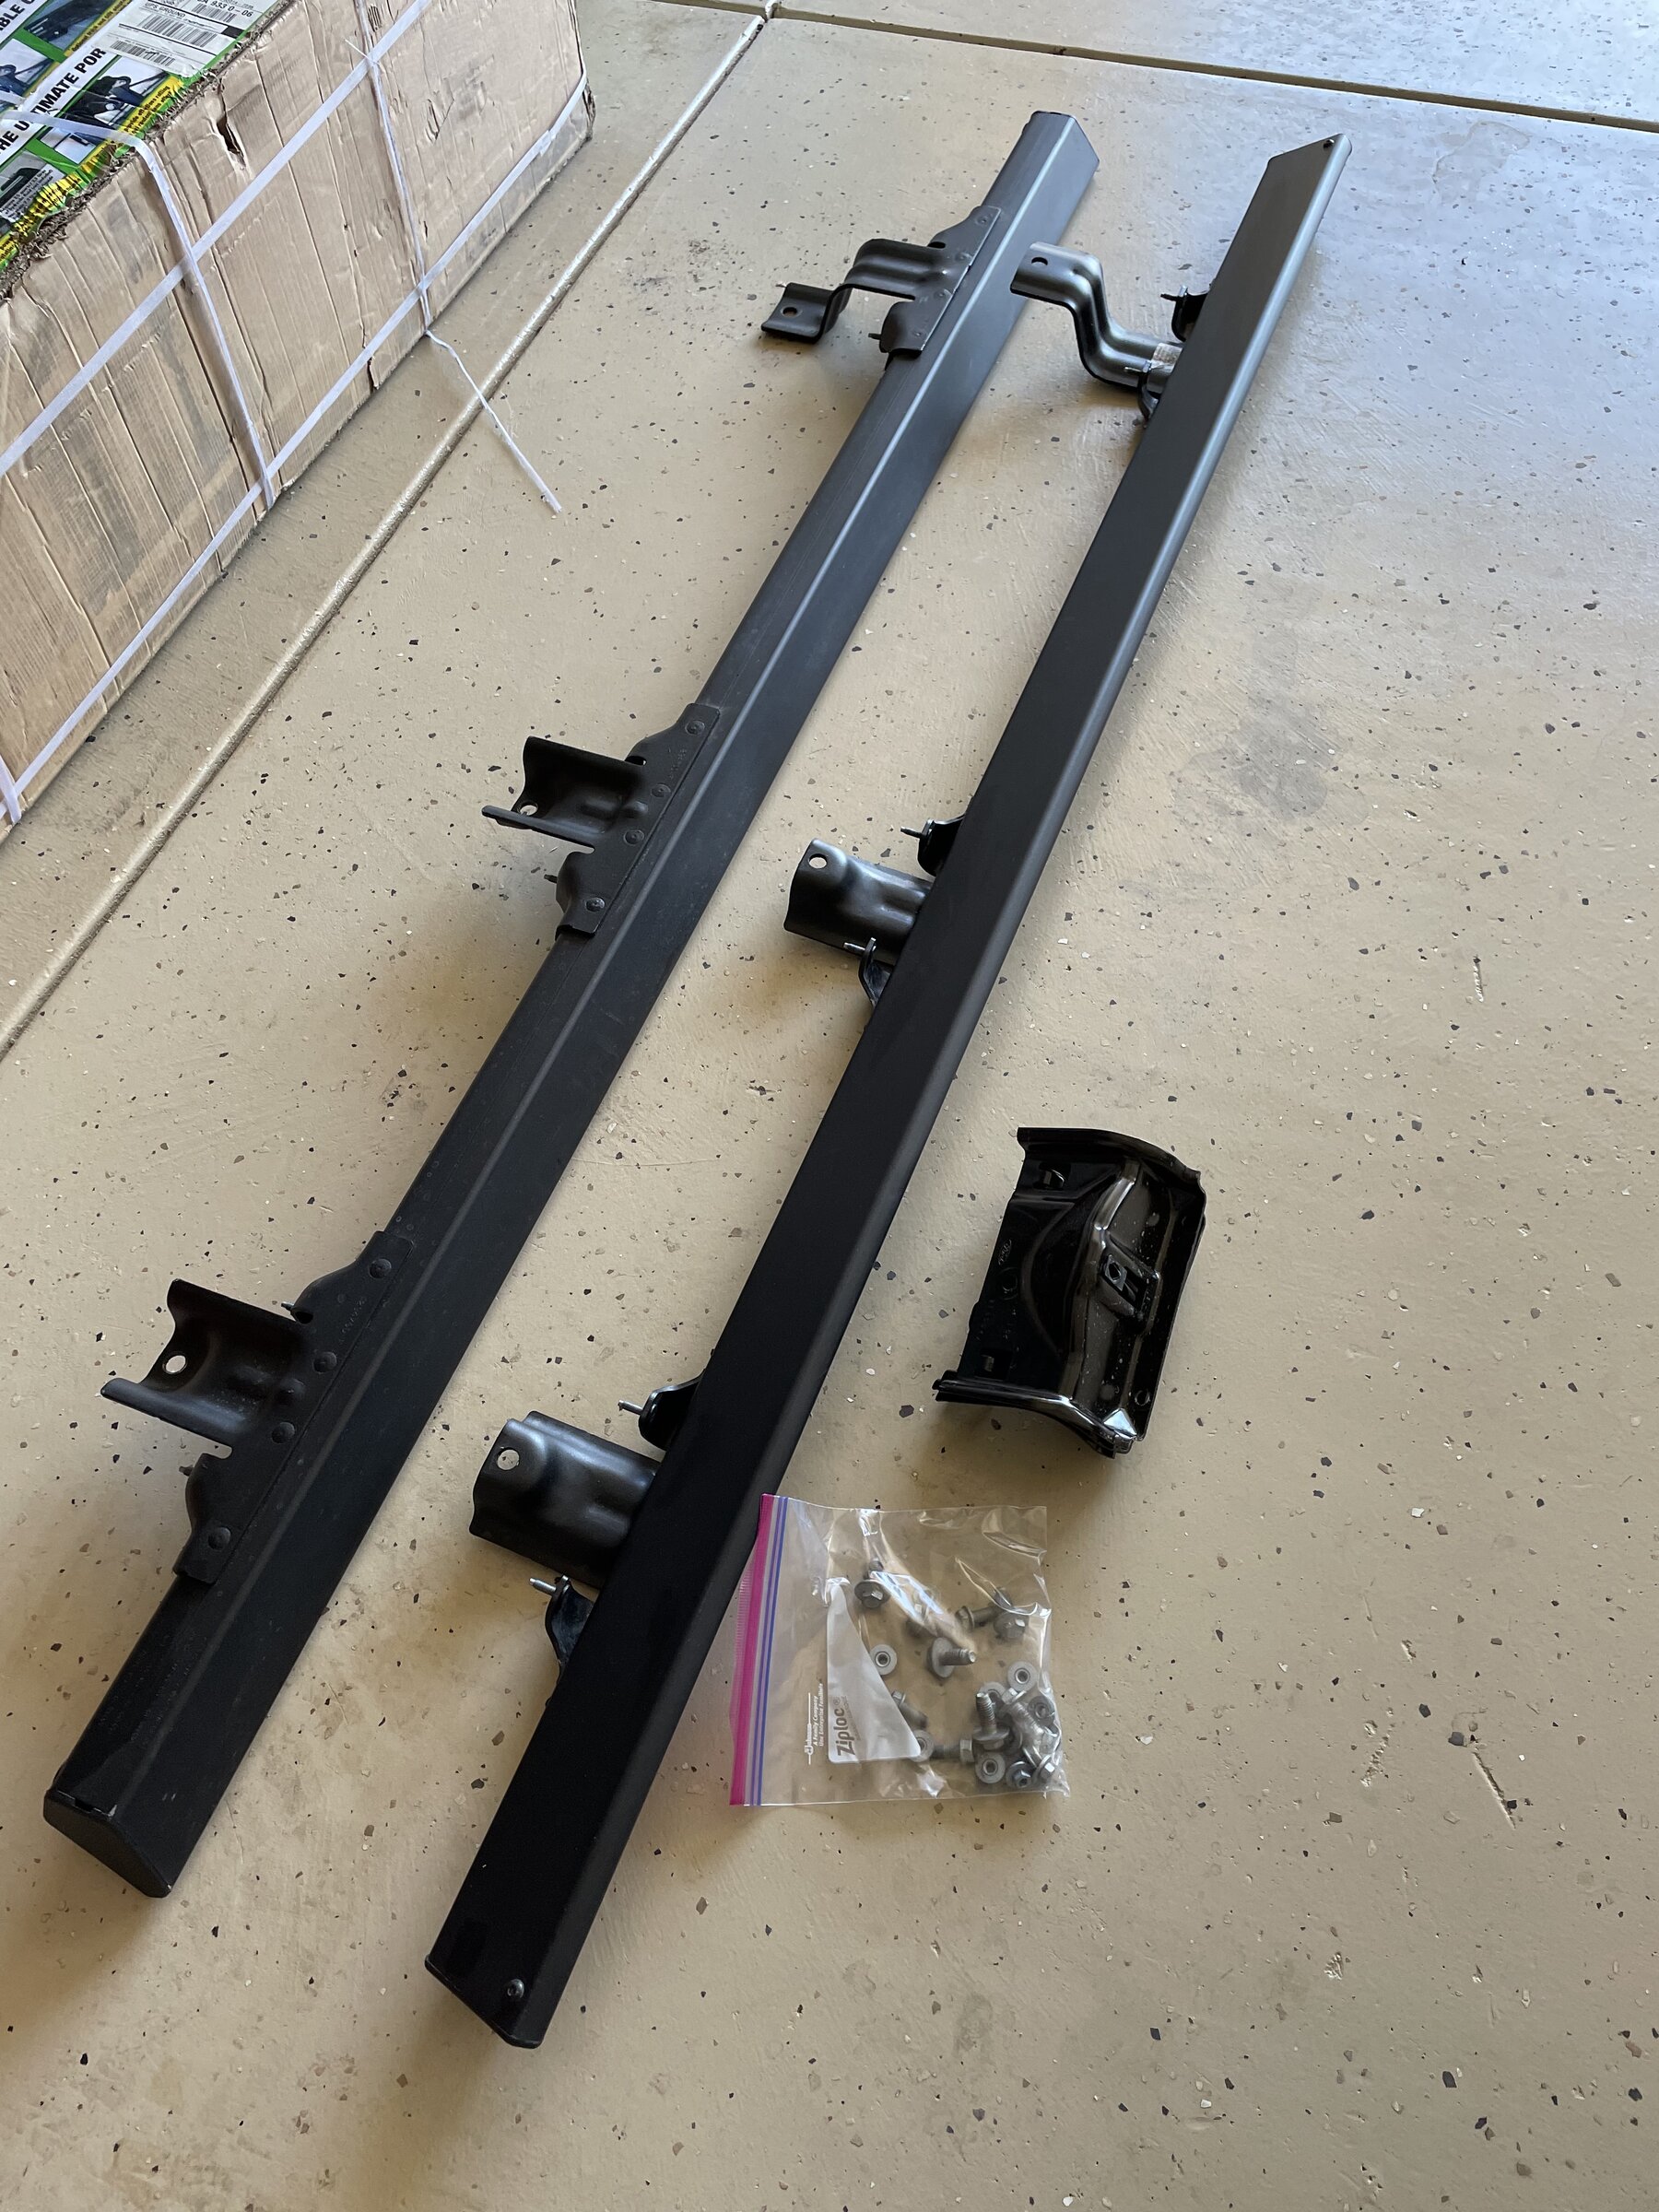 Ford Bronco OEM Rock Rails for sale…Central California 7733C1D1-2F7F-4EFD-A3A8-CE2B948ED251